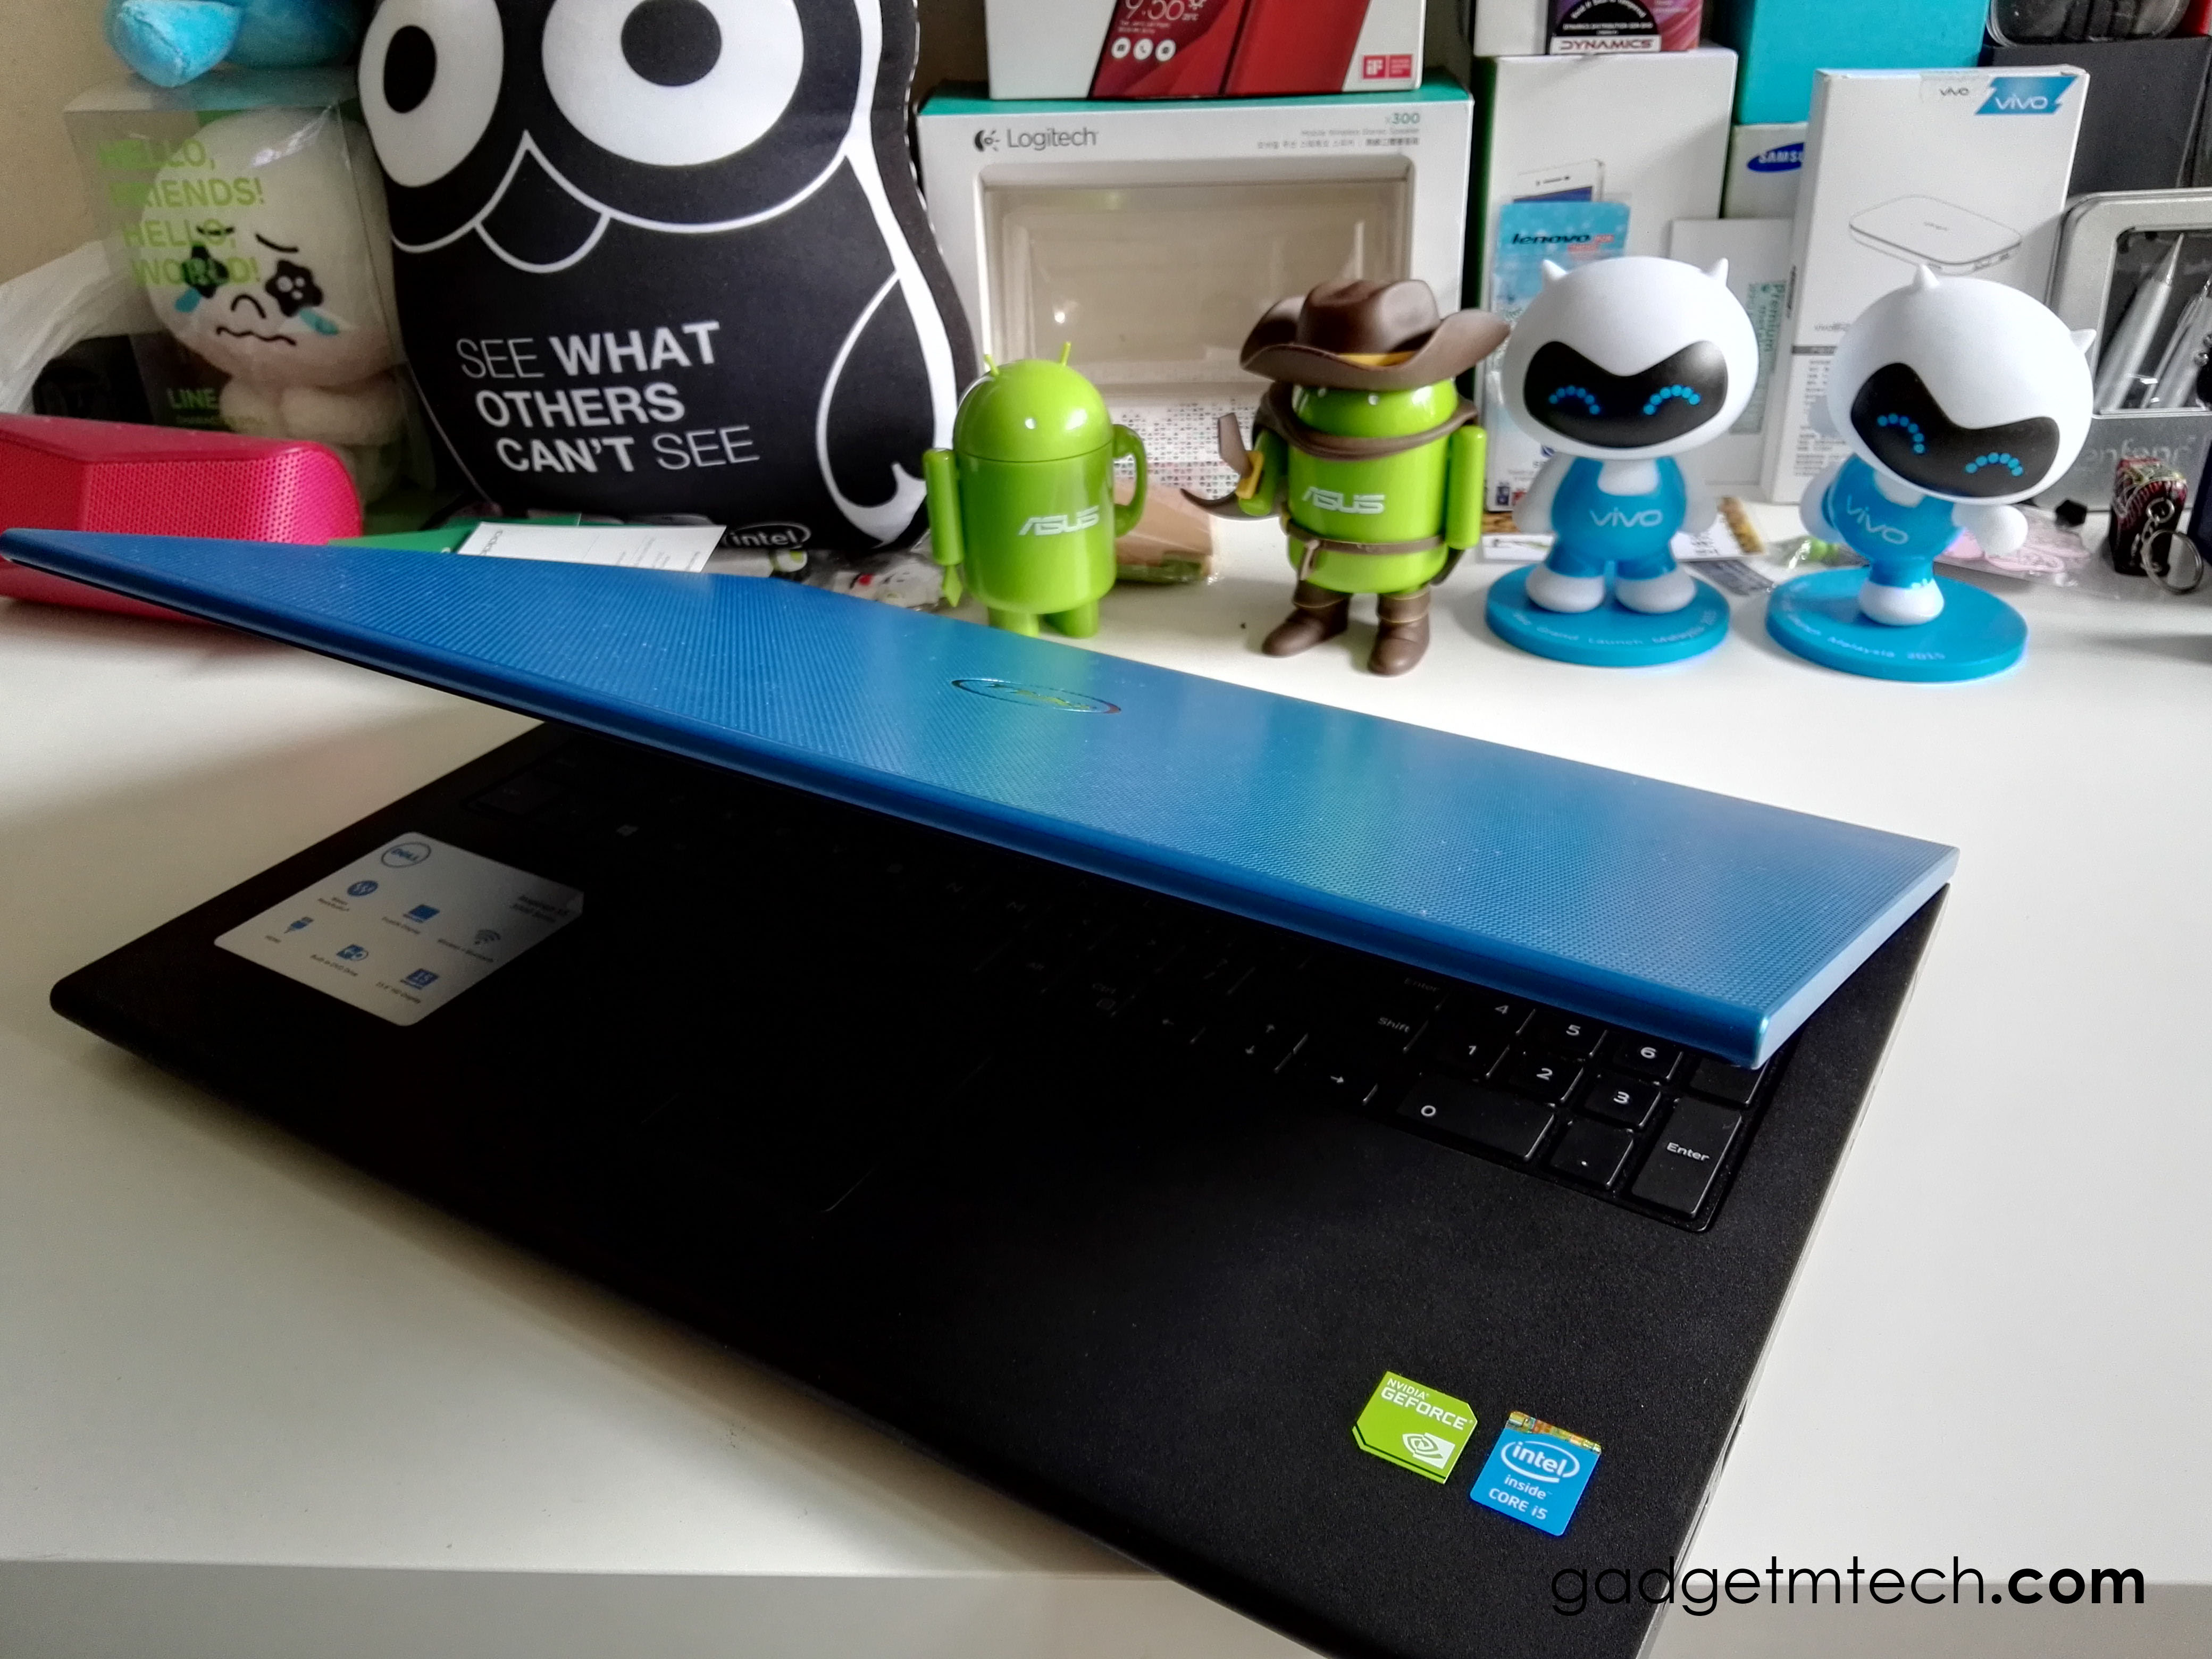 Dell Inspiron 15 3000 Review: Solid Multimedia Laptop